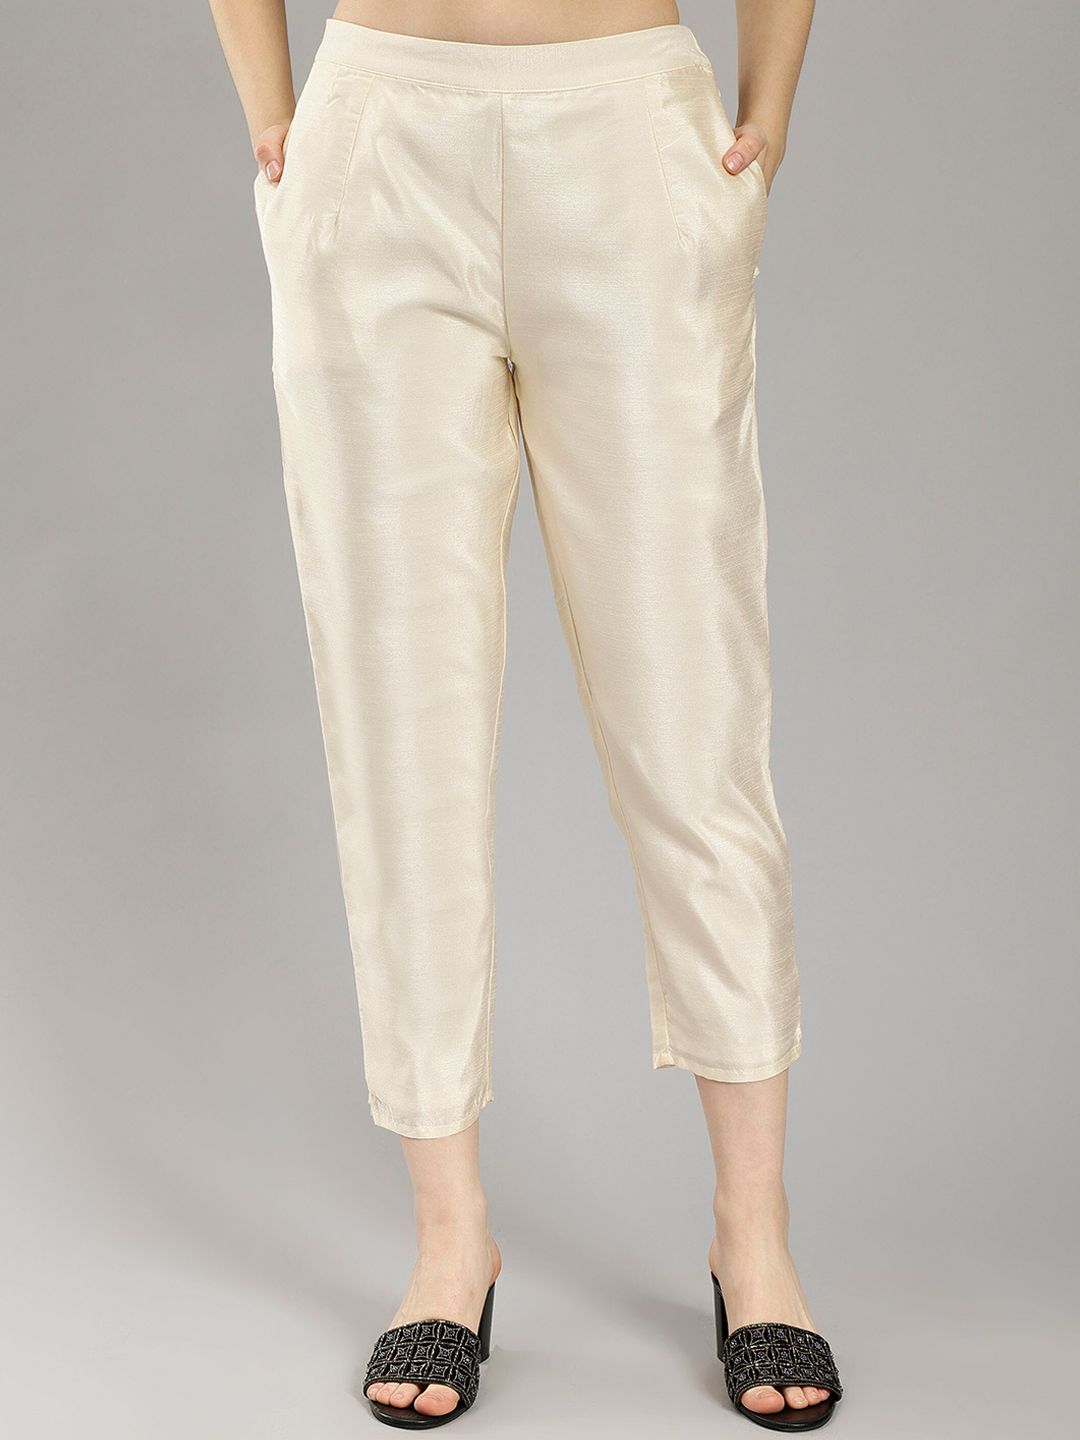 ENTELLUS Women Cream-Coloured Smart Tapered Fit High-Rise Trousers Price in India